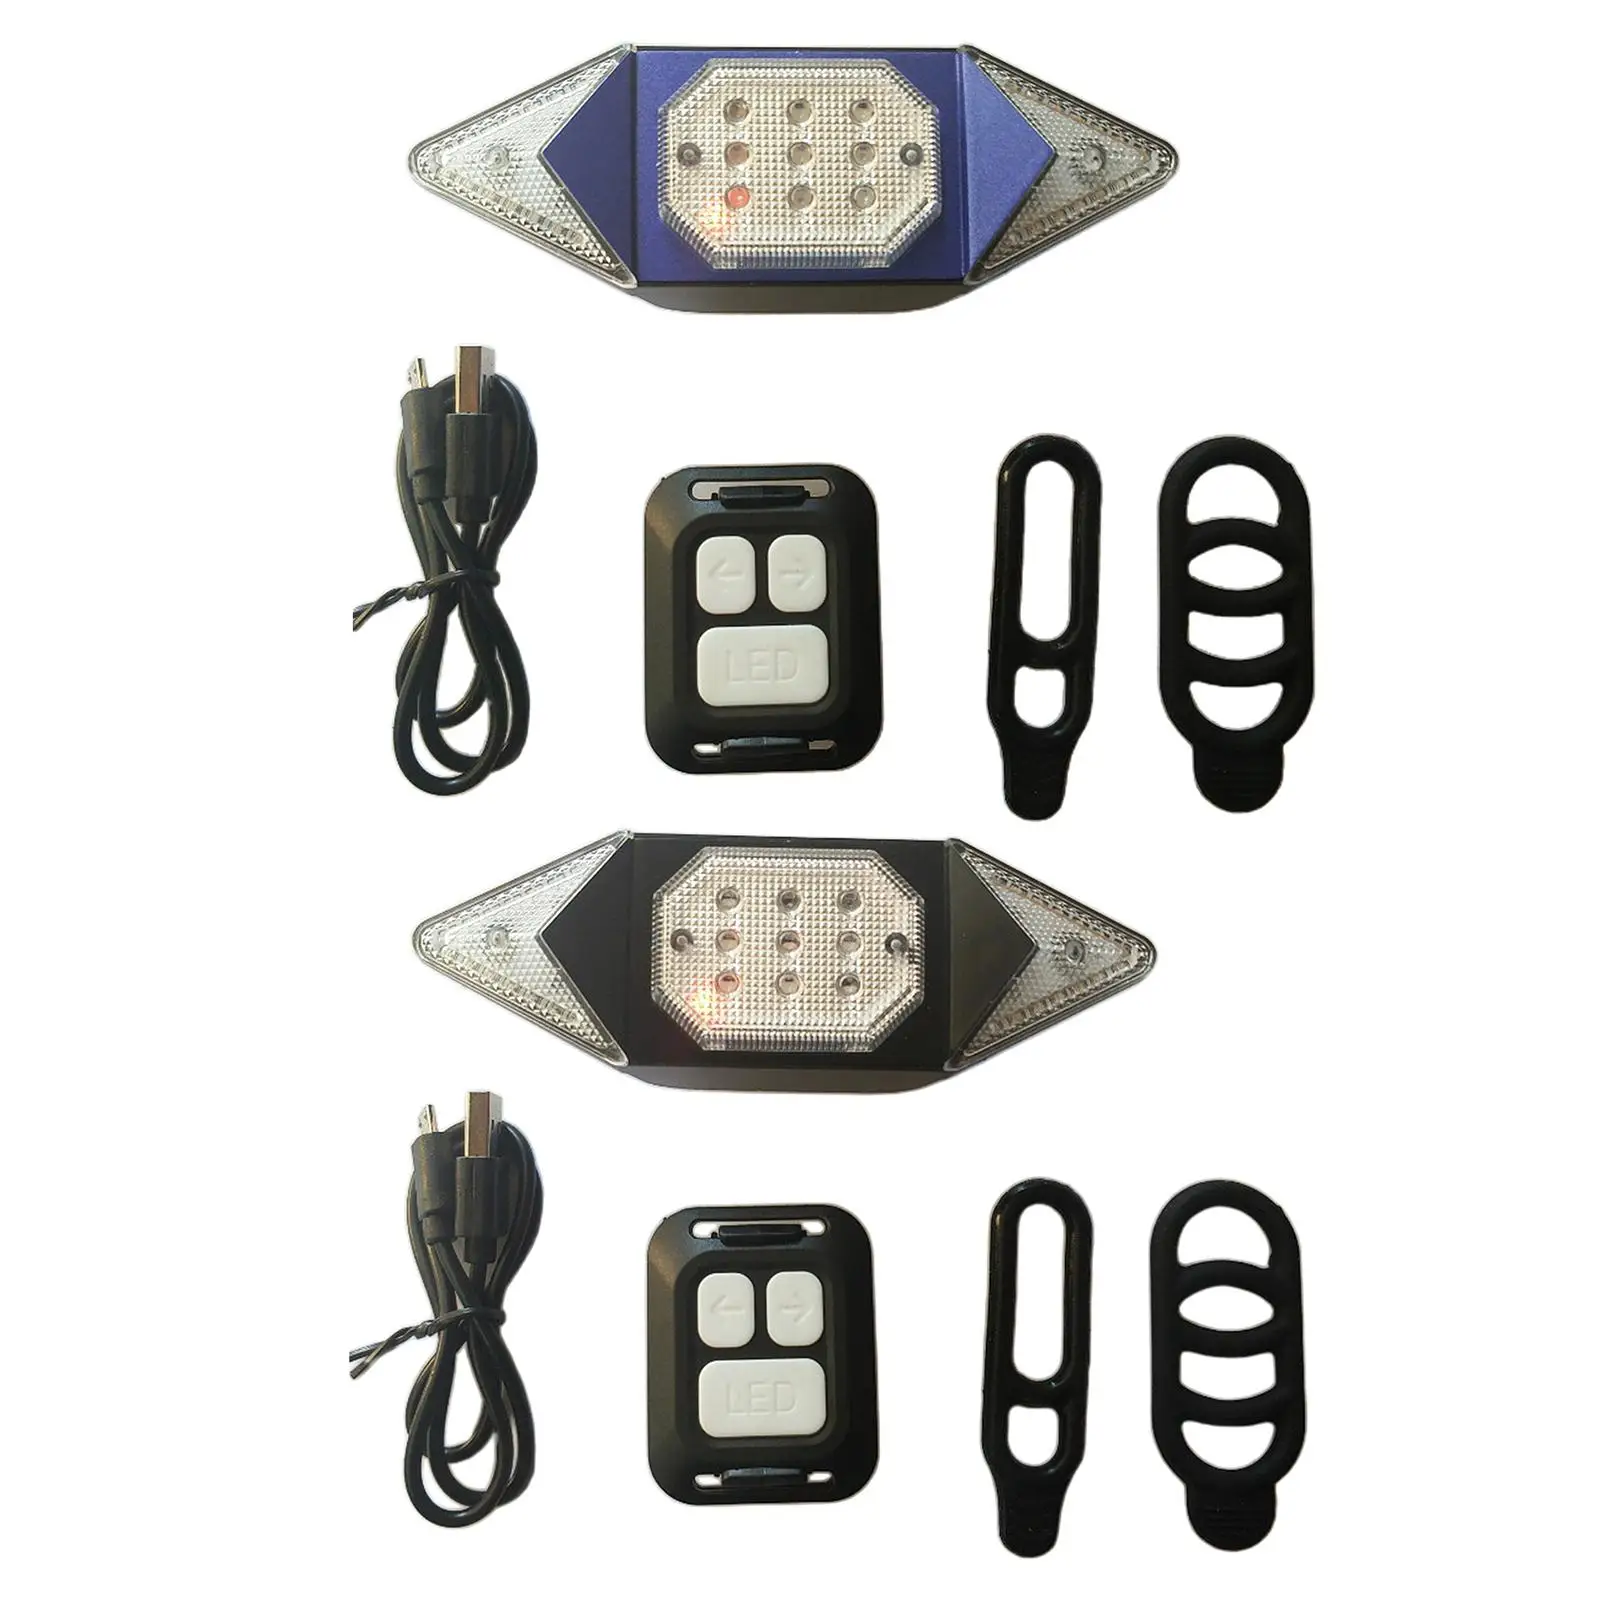 Bike Rear lighting led, Indicator with Remote Control USB Rechargeable, Waterproof Bike  s Lights for   Riding